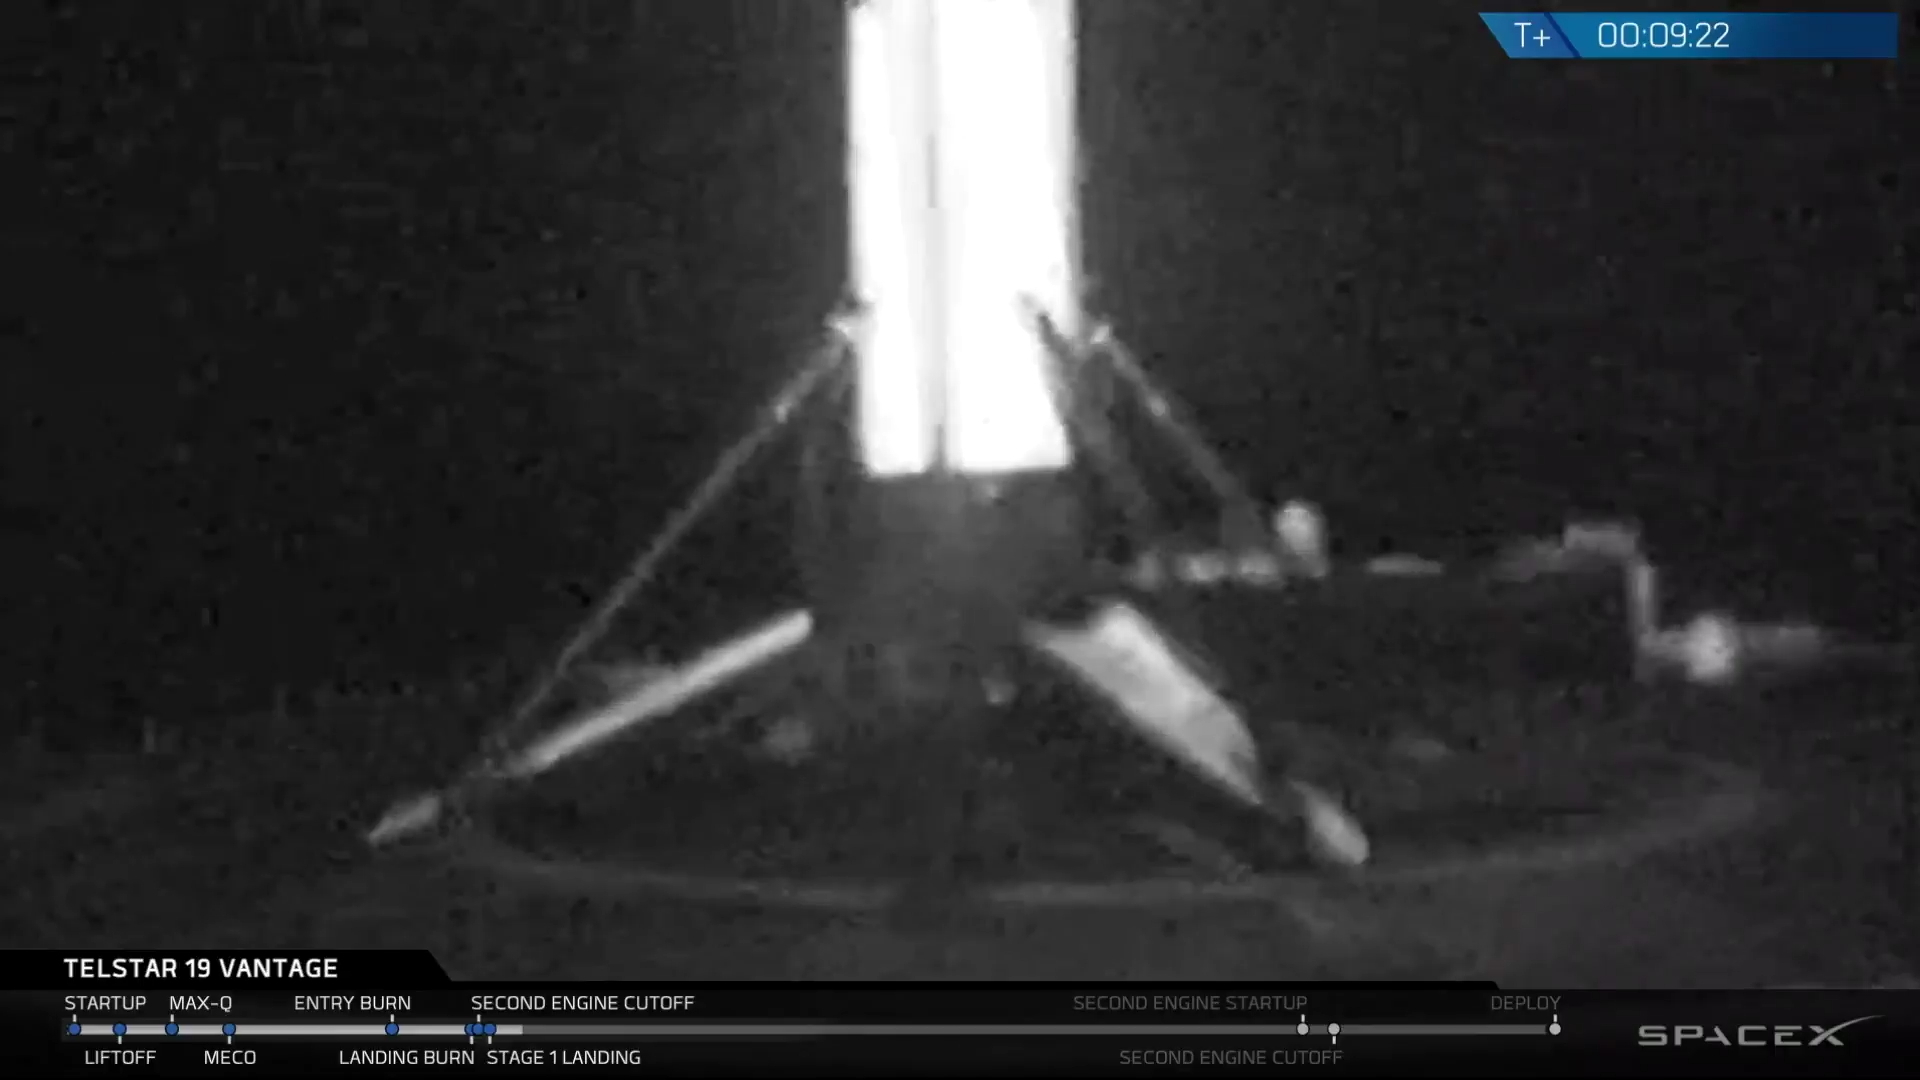 Core Stage landed on OCISLY (SpaceX)